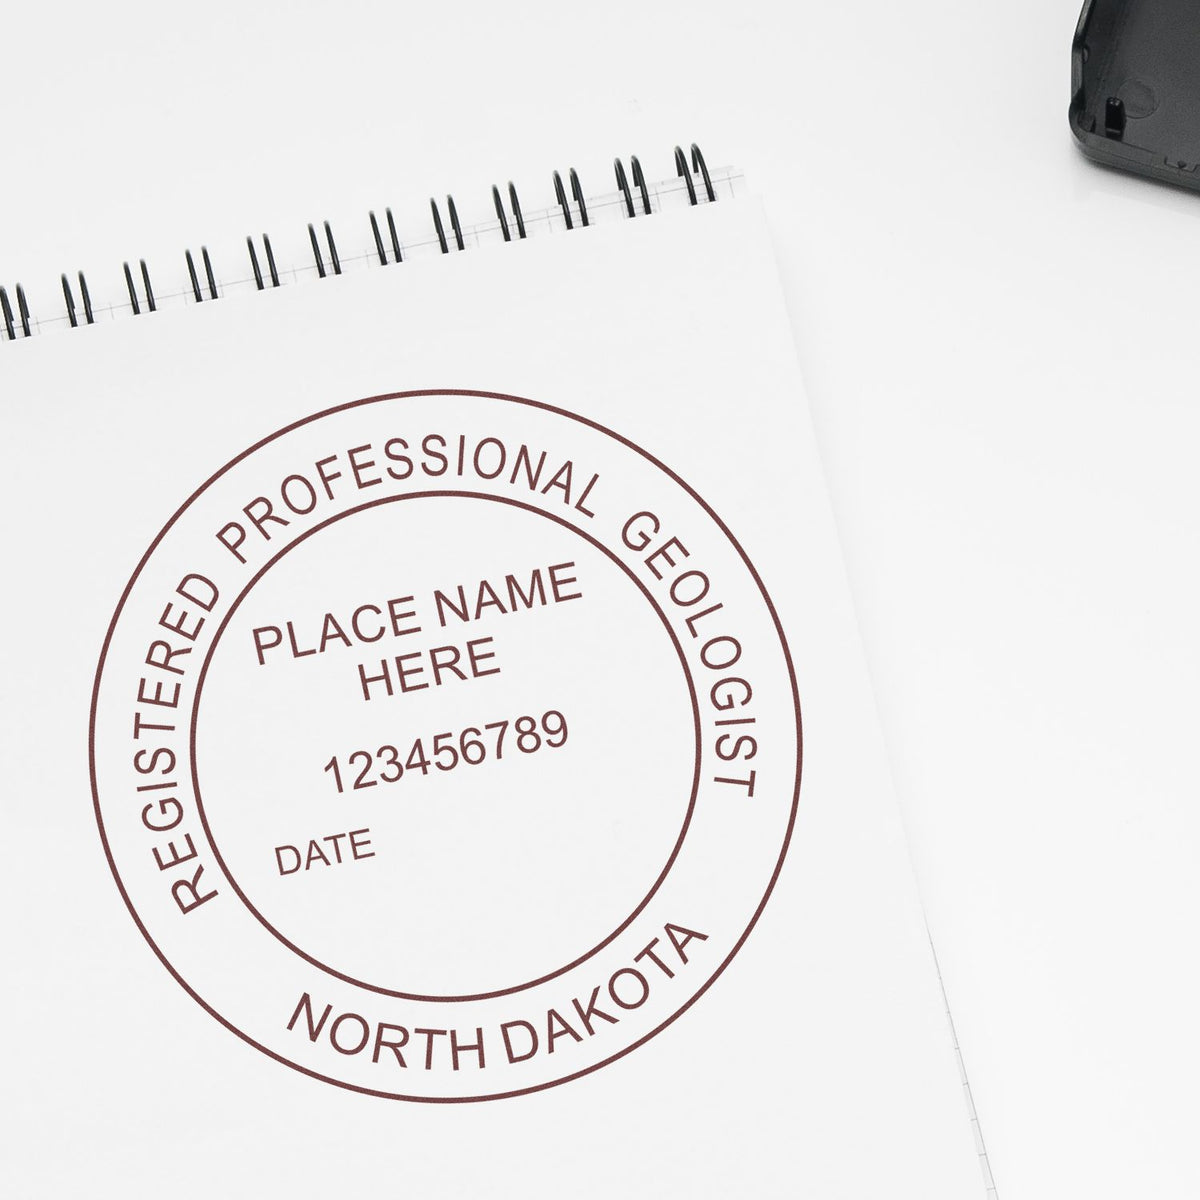 The Self-Inking North Dakota Geologist Stamp stamp impression comes to life with a crisp, detailed image stamped on paper - showcasing true professional quality.